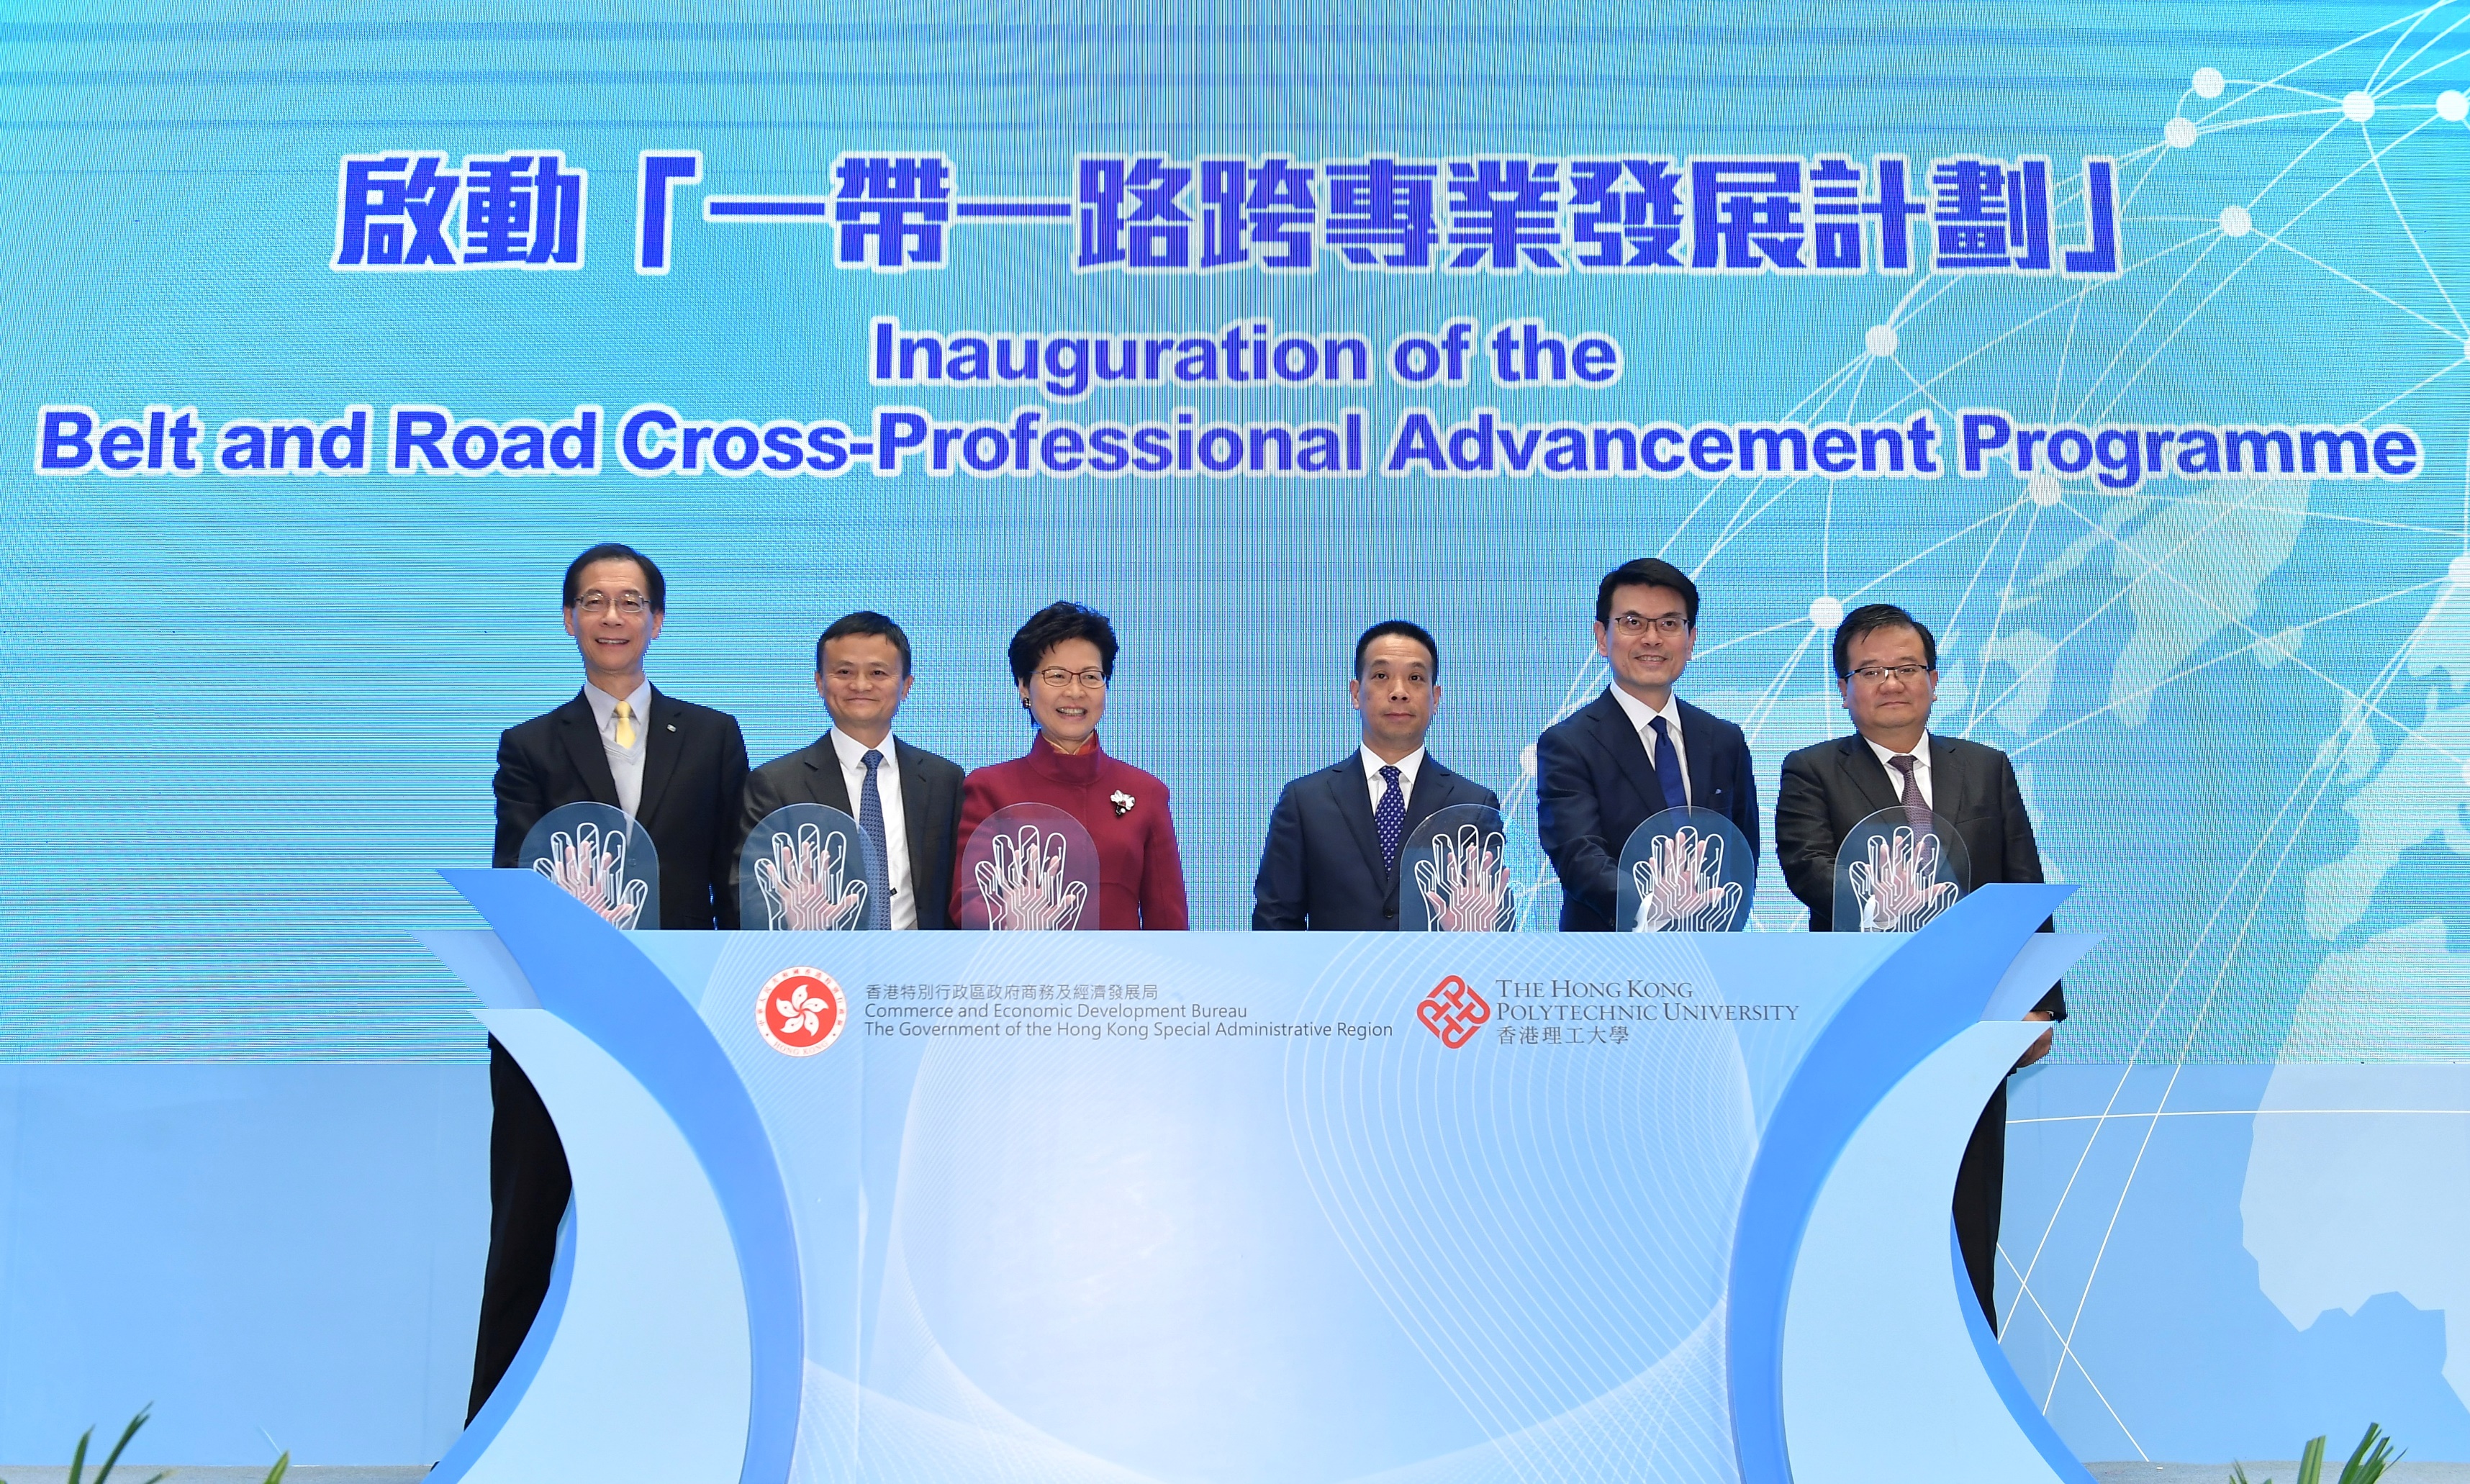 The Chief Executive, Mrs Lam (third left); the Deputy Director of the Hong Kong and Macao Affairs Office of the State Council, Mr Huang Liuquan (third right); the Secretary for Commerce and Economic Development, Mr Edward Yau (second right); the Executive Chairman of the Alibaba Group, Mr Jack Ma (second left); the President of the Hong Kong Polytechnic University, Professor Timothy Tong (first left); and the Chairman of the Hong Kong Chinese Enterprises Association, Mr Gao Yingxin (first right), officiated at the inauguration of the Belt and Road Cross-Professional Advancement Programme